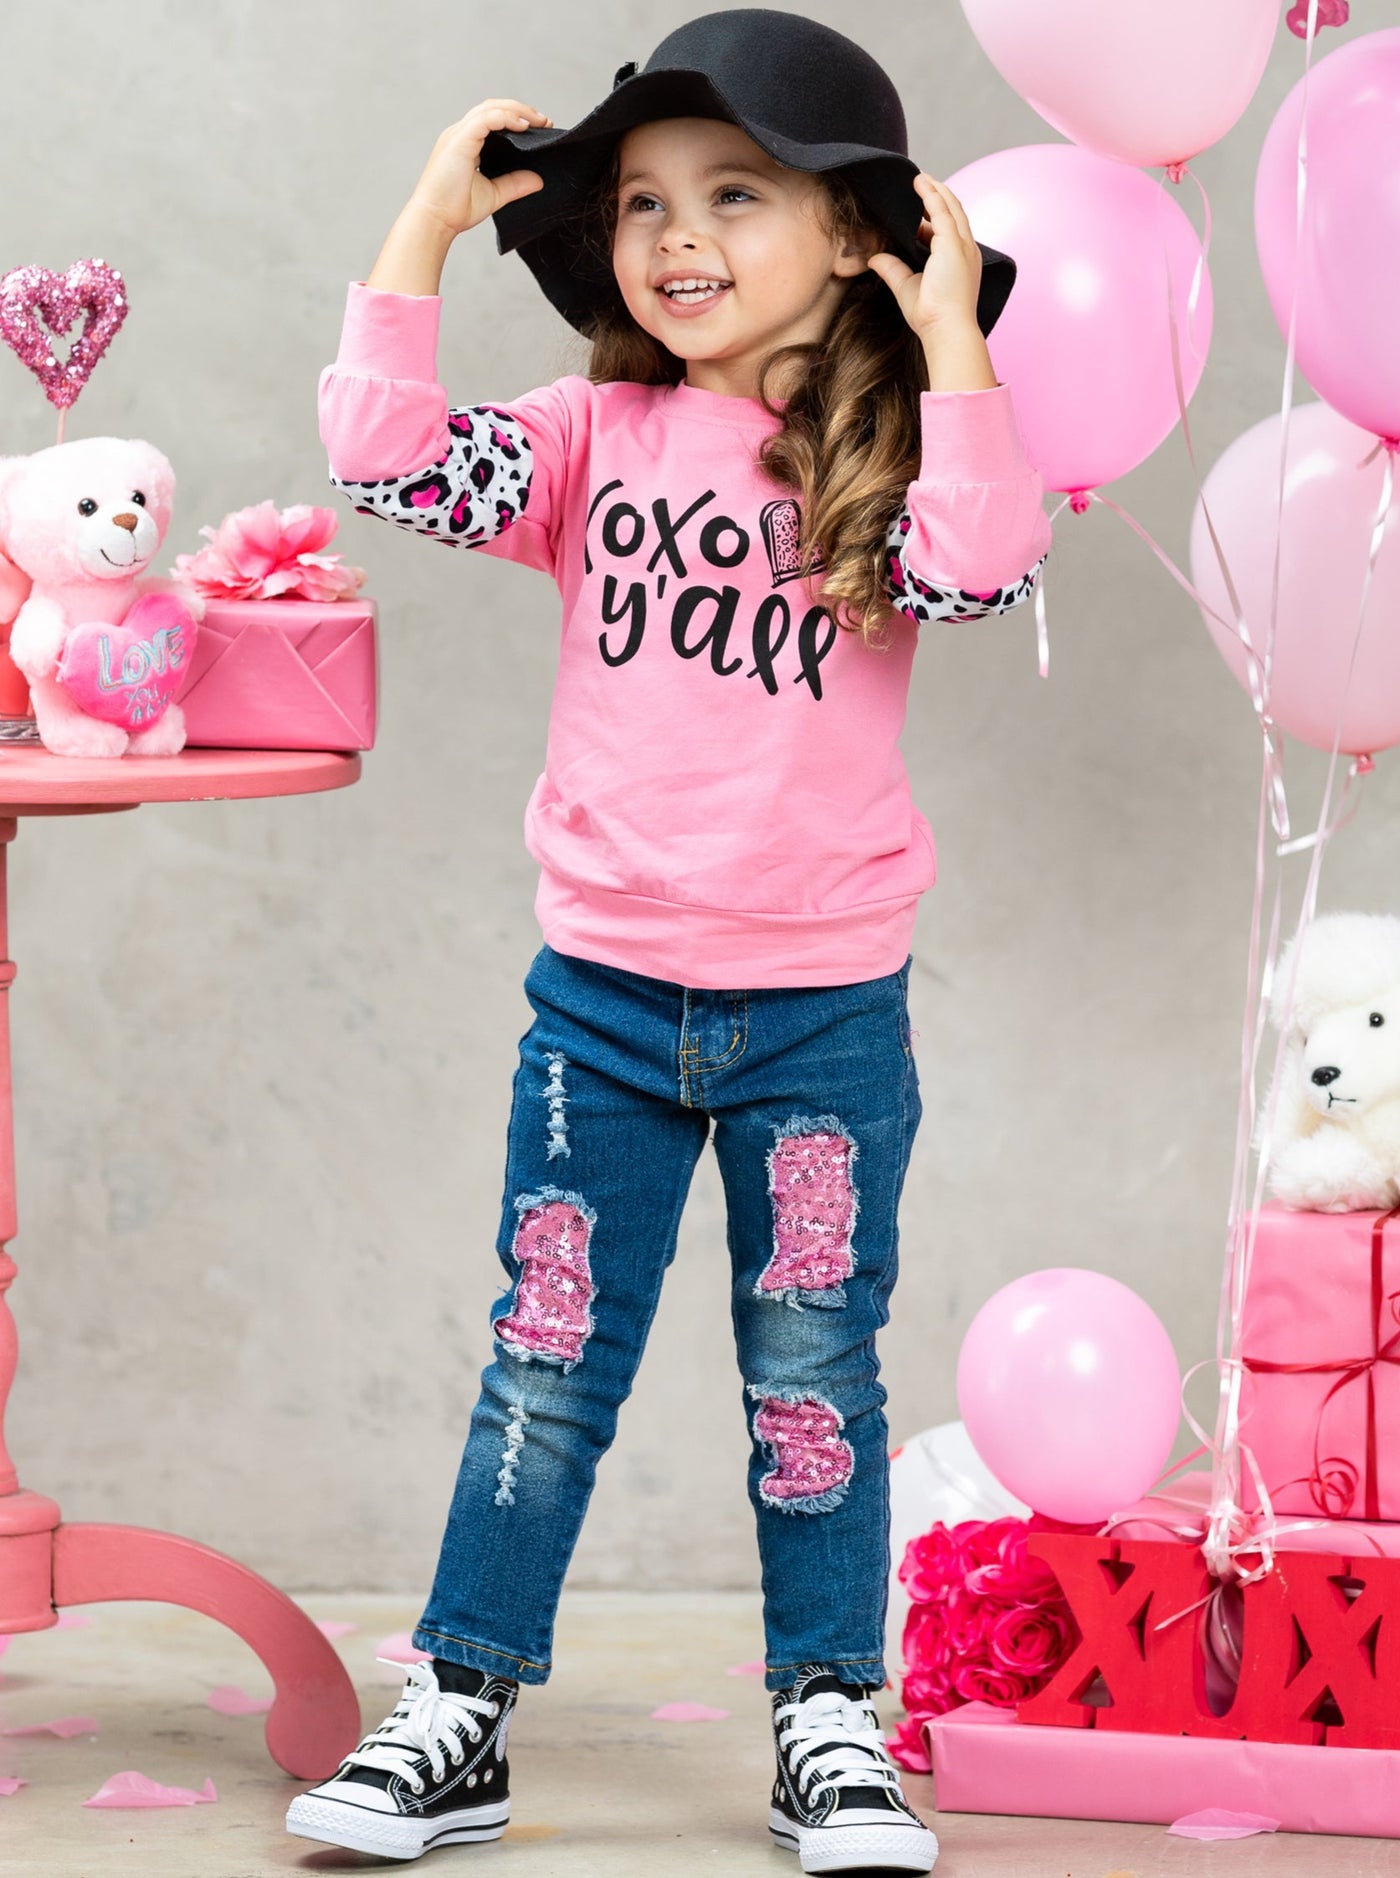 Kids Valentine's Clothes | XOXO Y'all Top & Sequin Patched Jeans Set